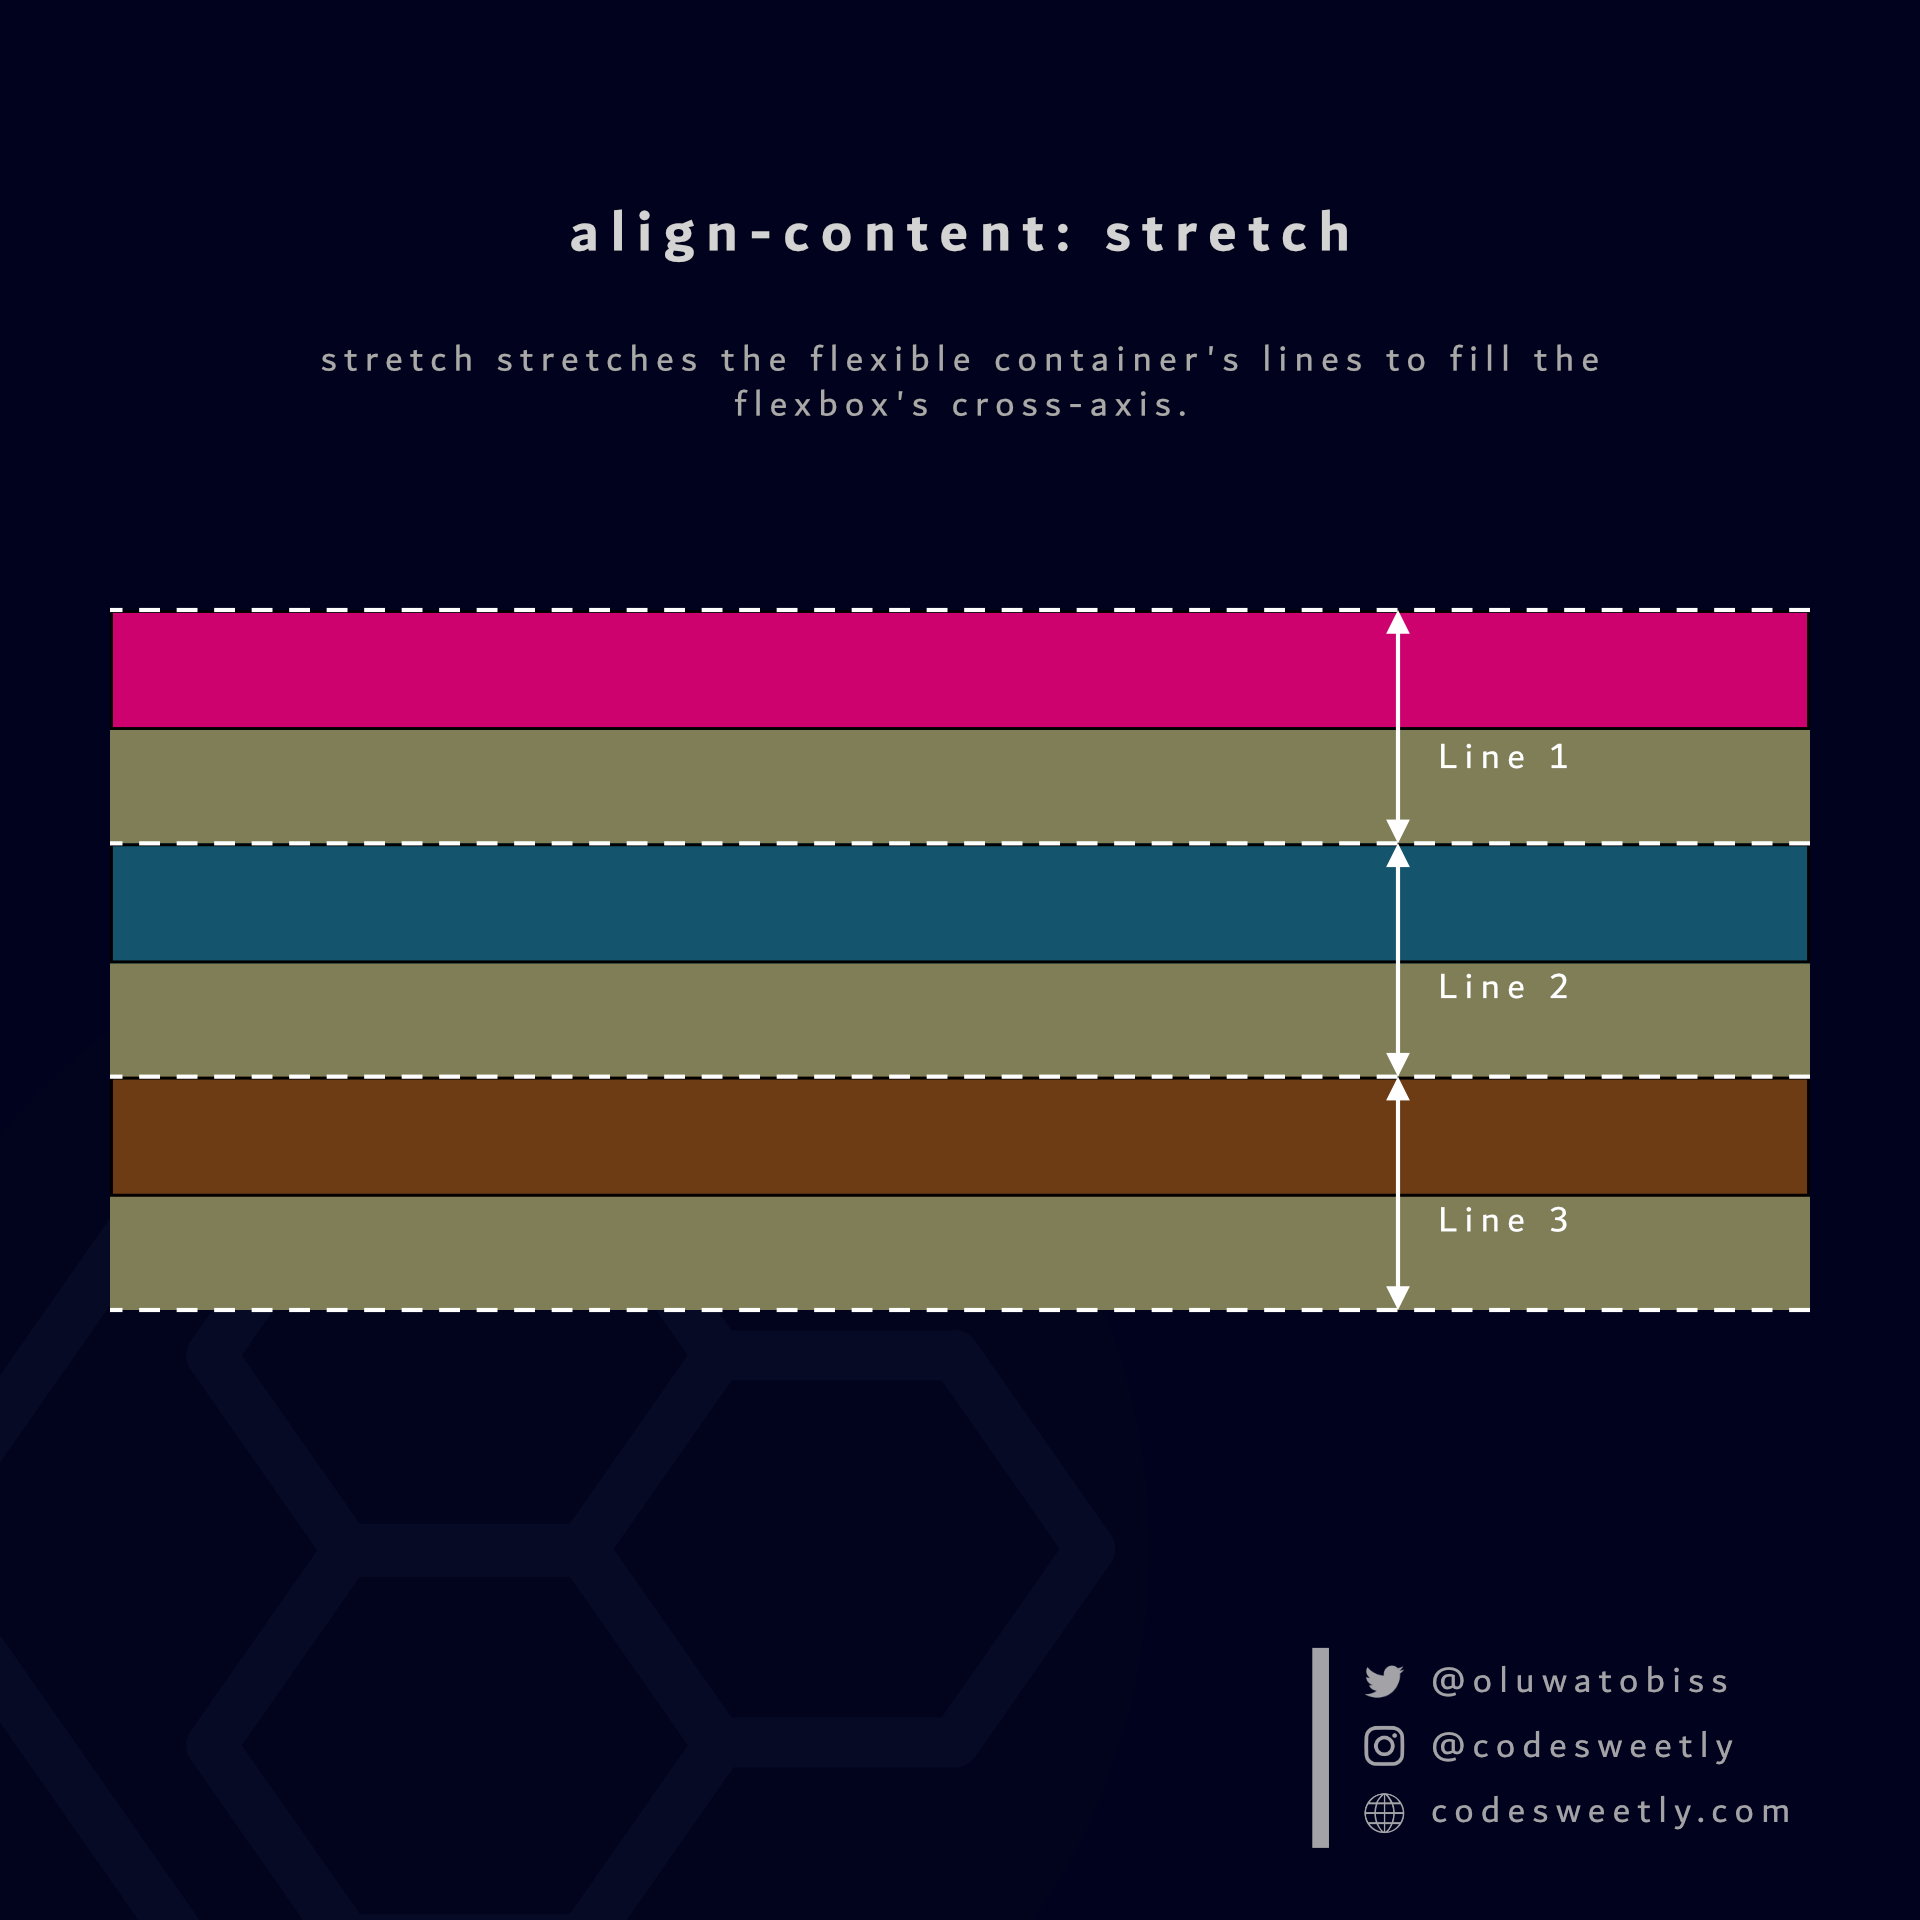 Illustration of align-content&#39;s stretch
value